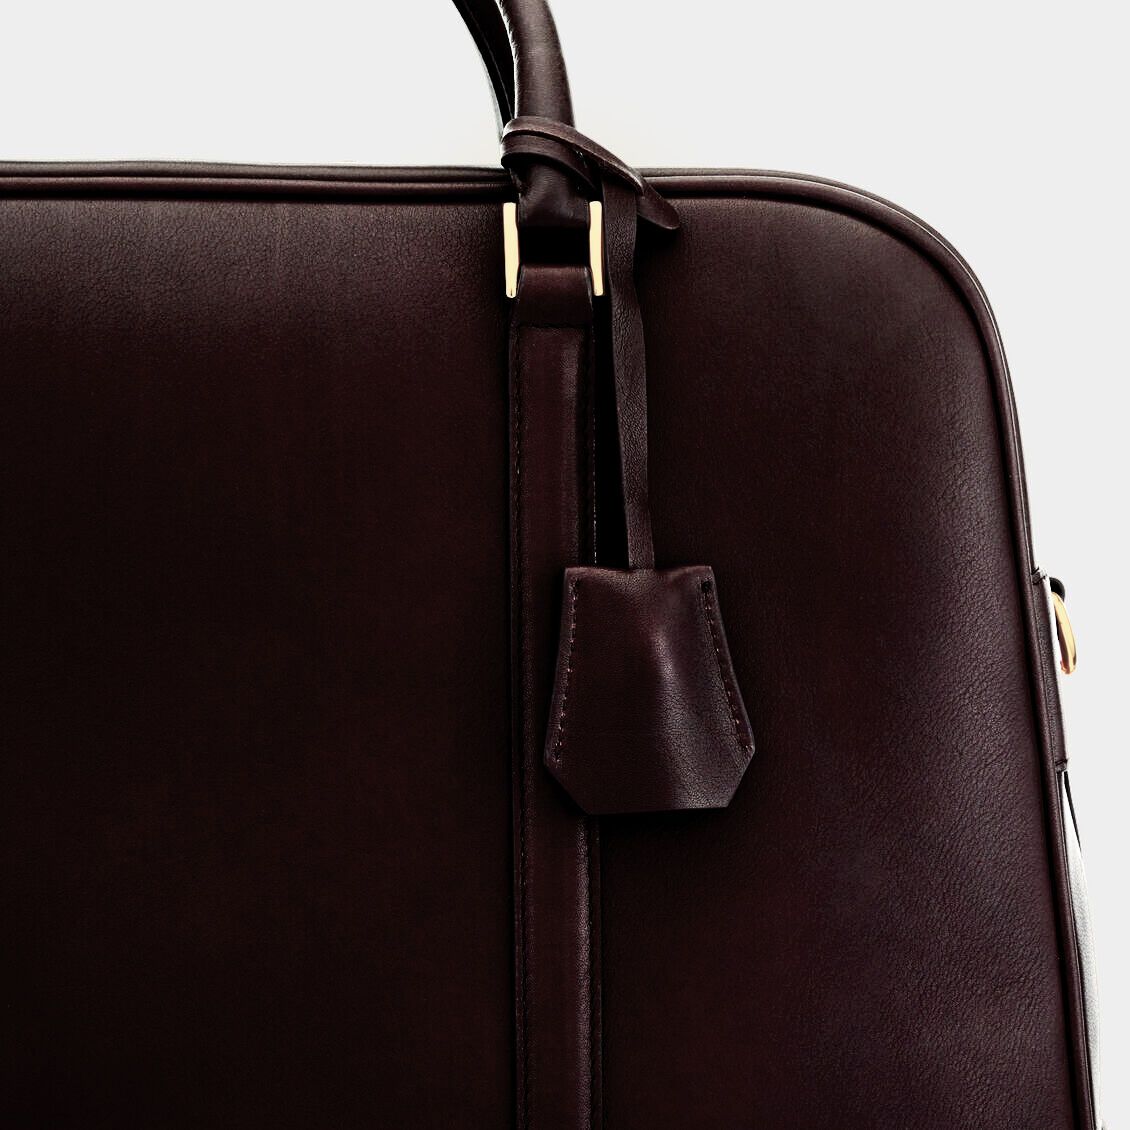 Bespoke Latimer -

                  
                    Butter Leather in Chocolate -
                  

                  Anya Hindmarch US
